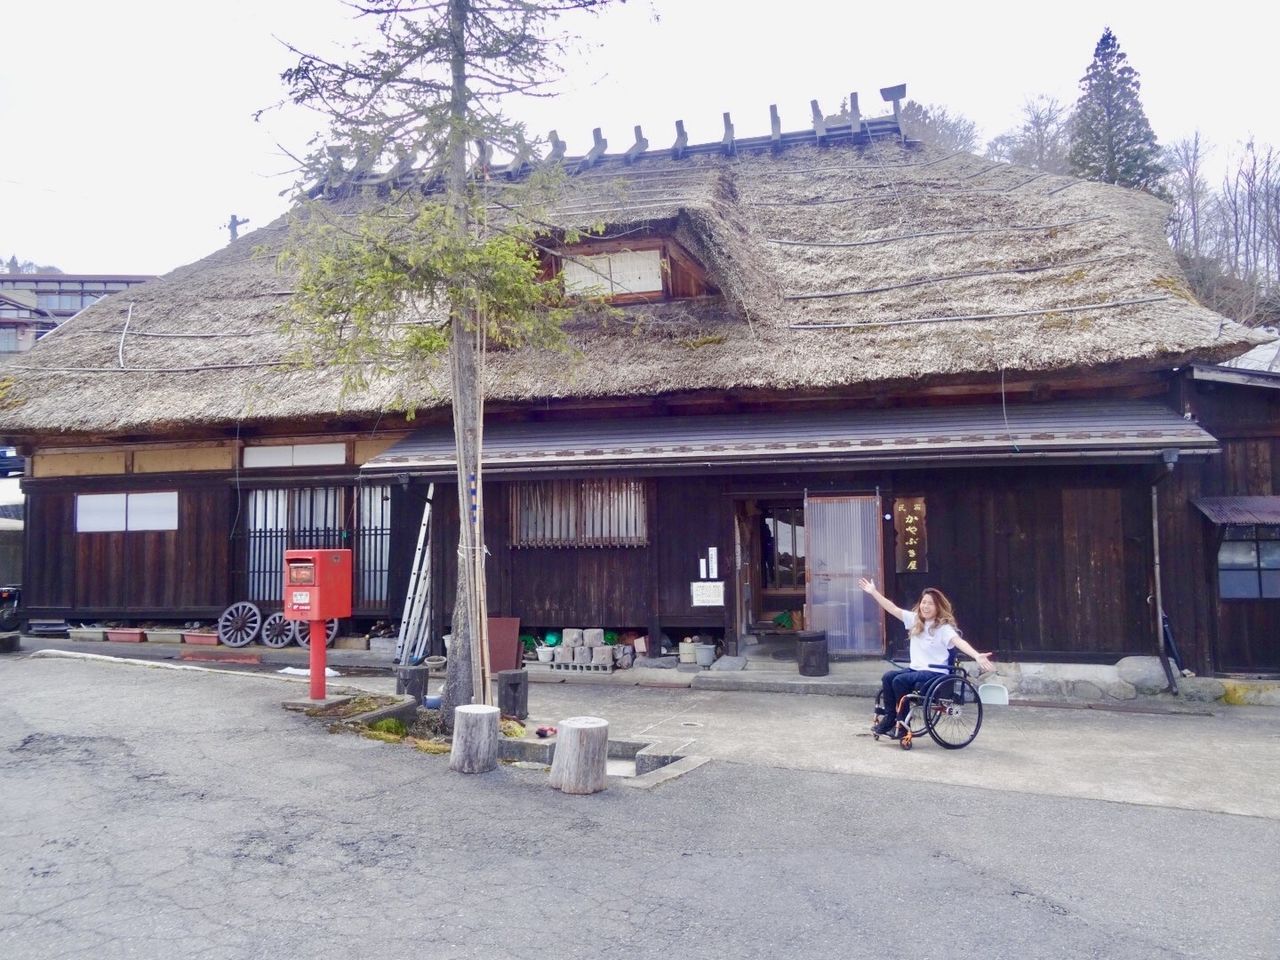 Shibuya grew up in one of a dwindling number of traditional thatched houses still in use, which the family ran as a minshuku bed-and-breakfast (not currently open for business). (Photo courtesy of Shibuya Mako)